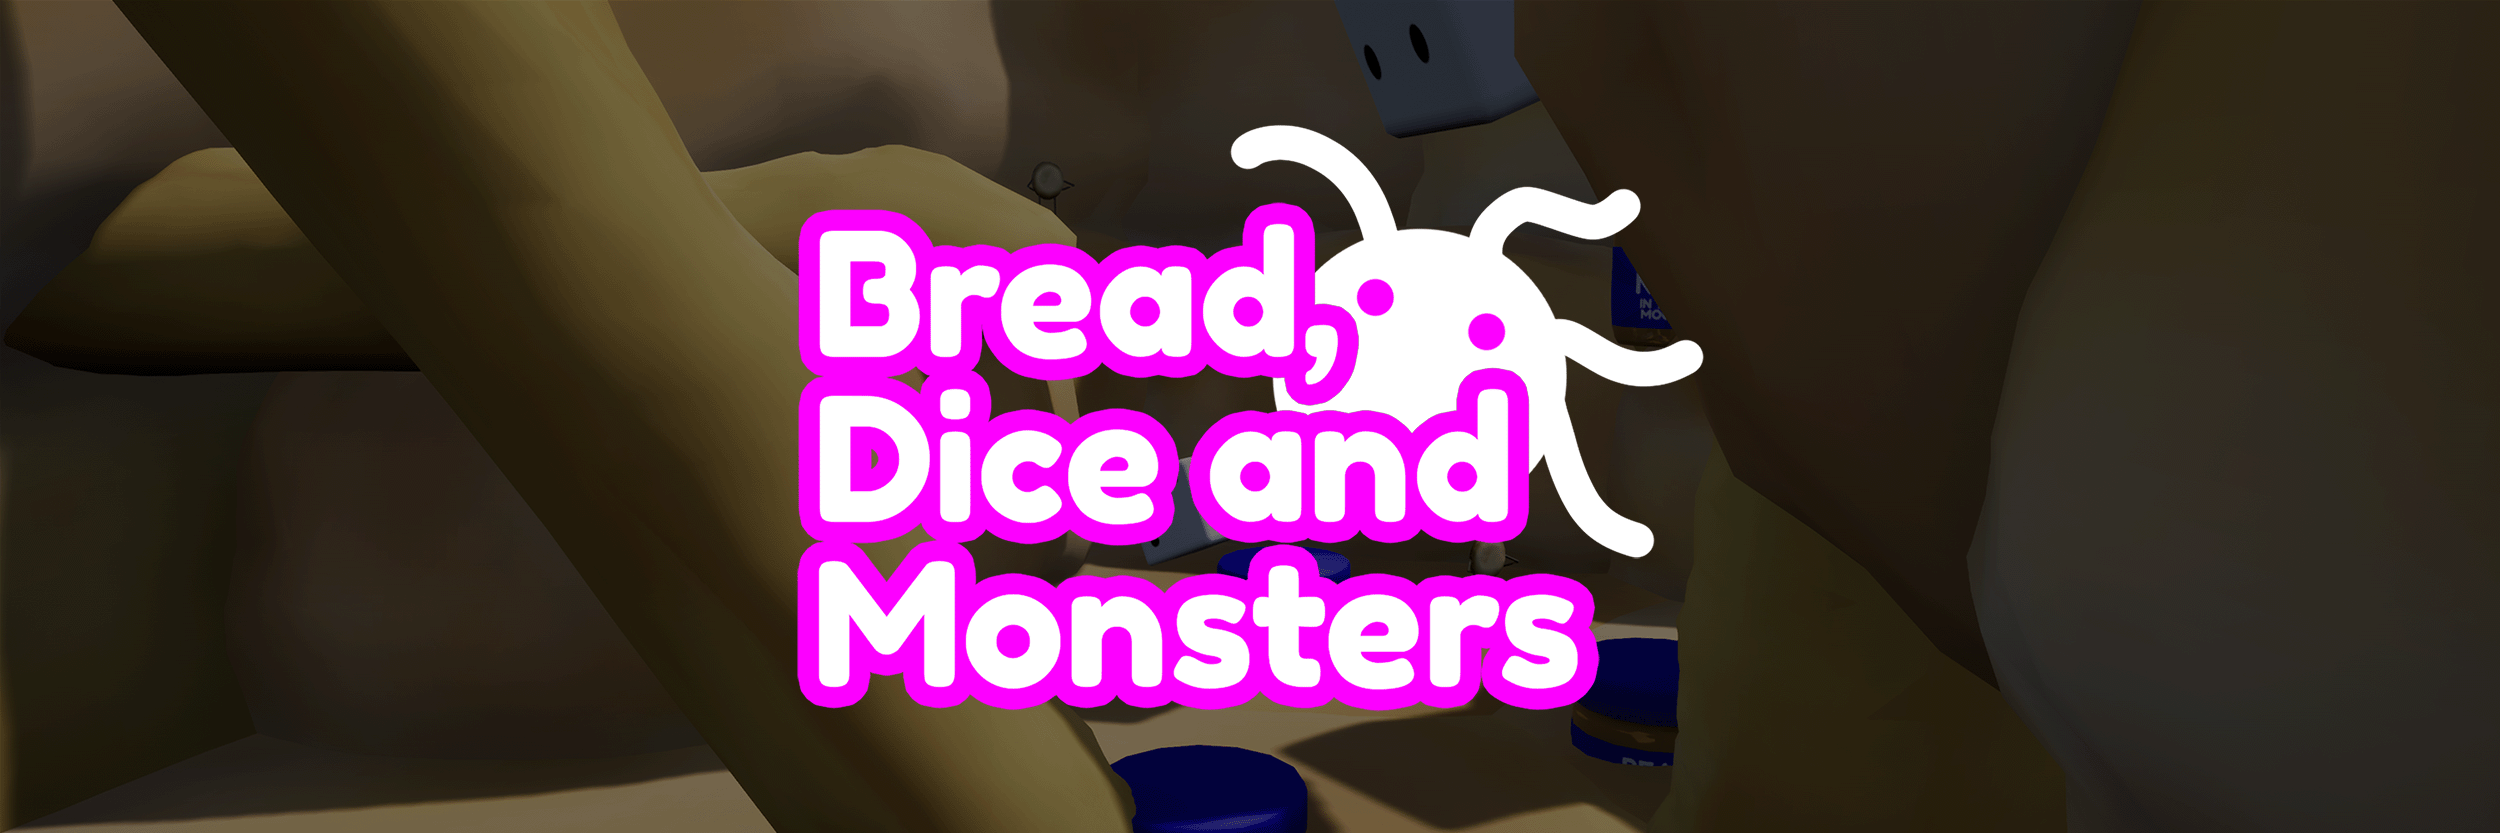 Bread, Dice and Monsters